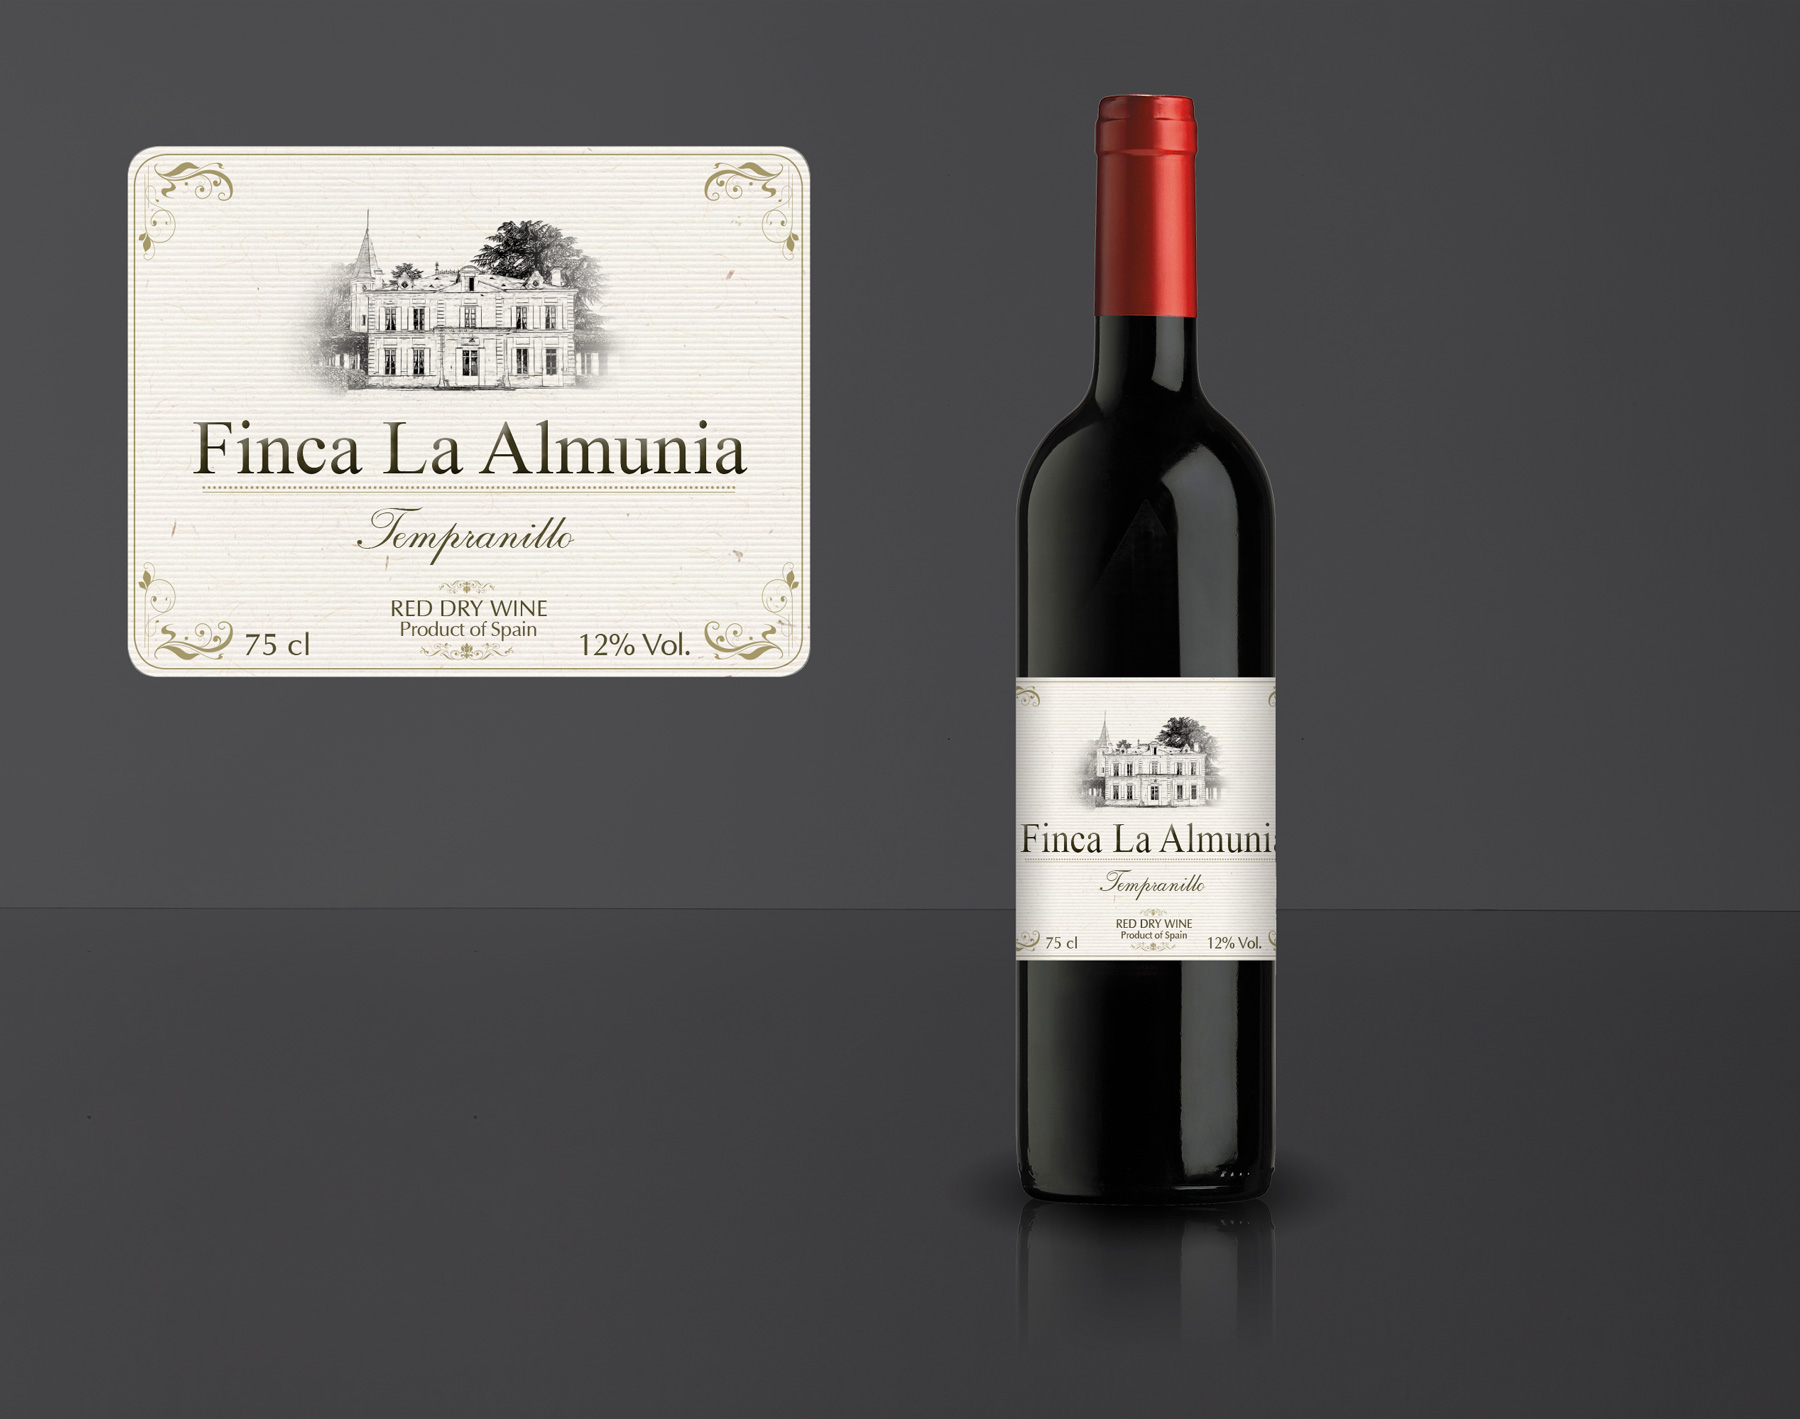 Portfolio of graphic and creative design works wine labels and packaging for Spanish wine FINCA LA ALMUNIA